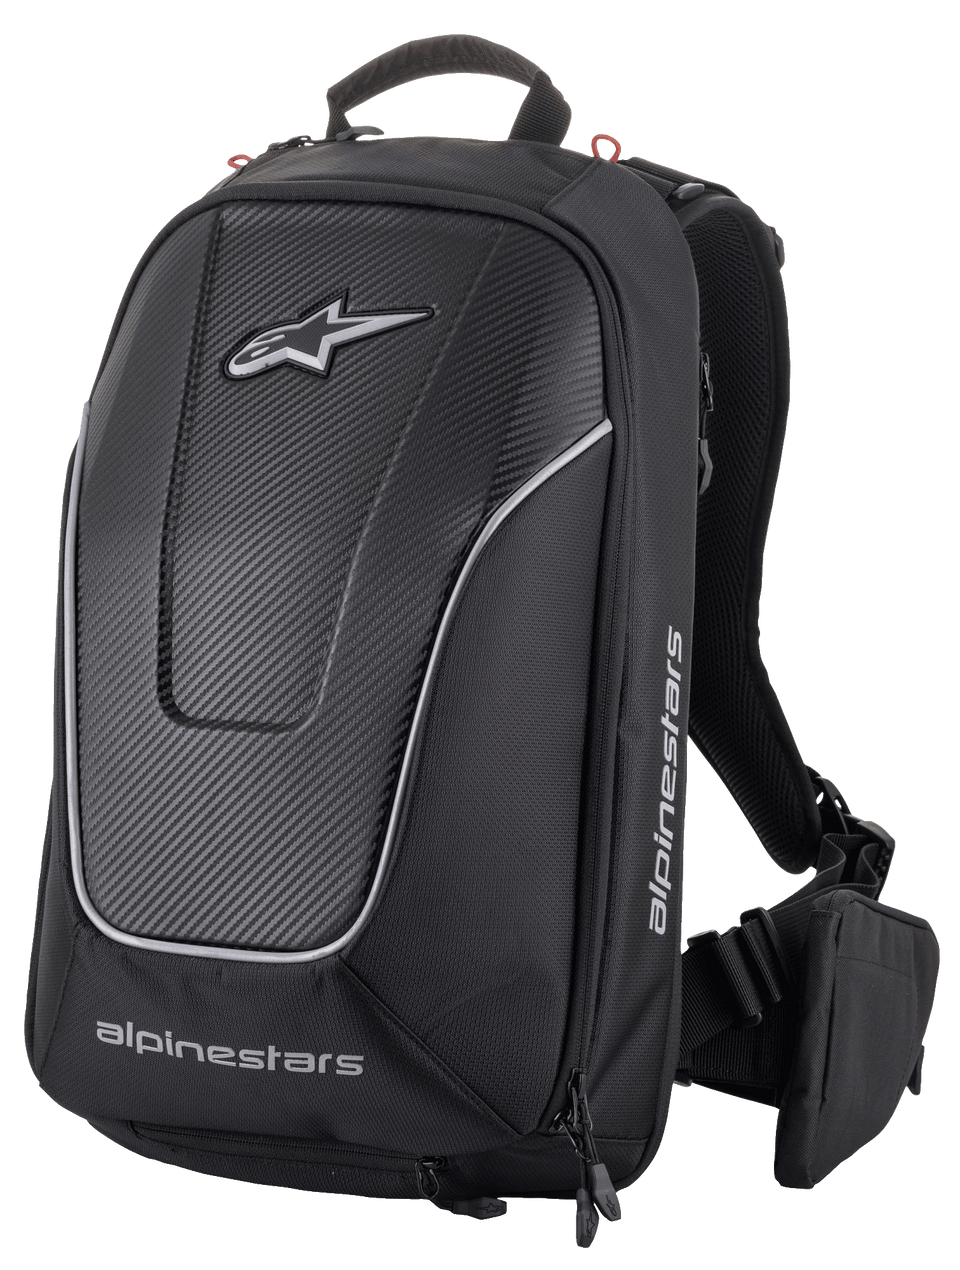 The black Charger Pro Backpack from Alpinestars EU features a sleek, aerodynamic design with prominent logos on the front and side. It includes padded shoulder straps, an adjustable harness, and an additional side pouch, crafted with a combination of textured and smooth materials.